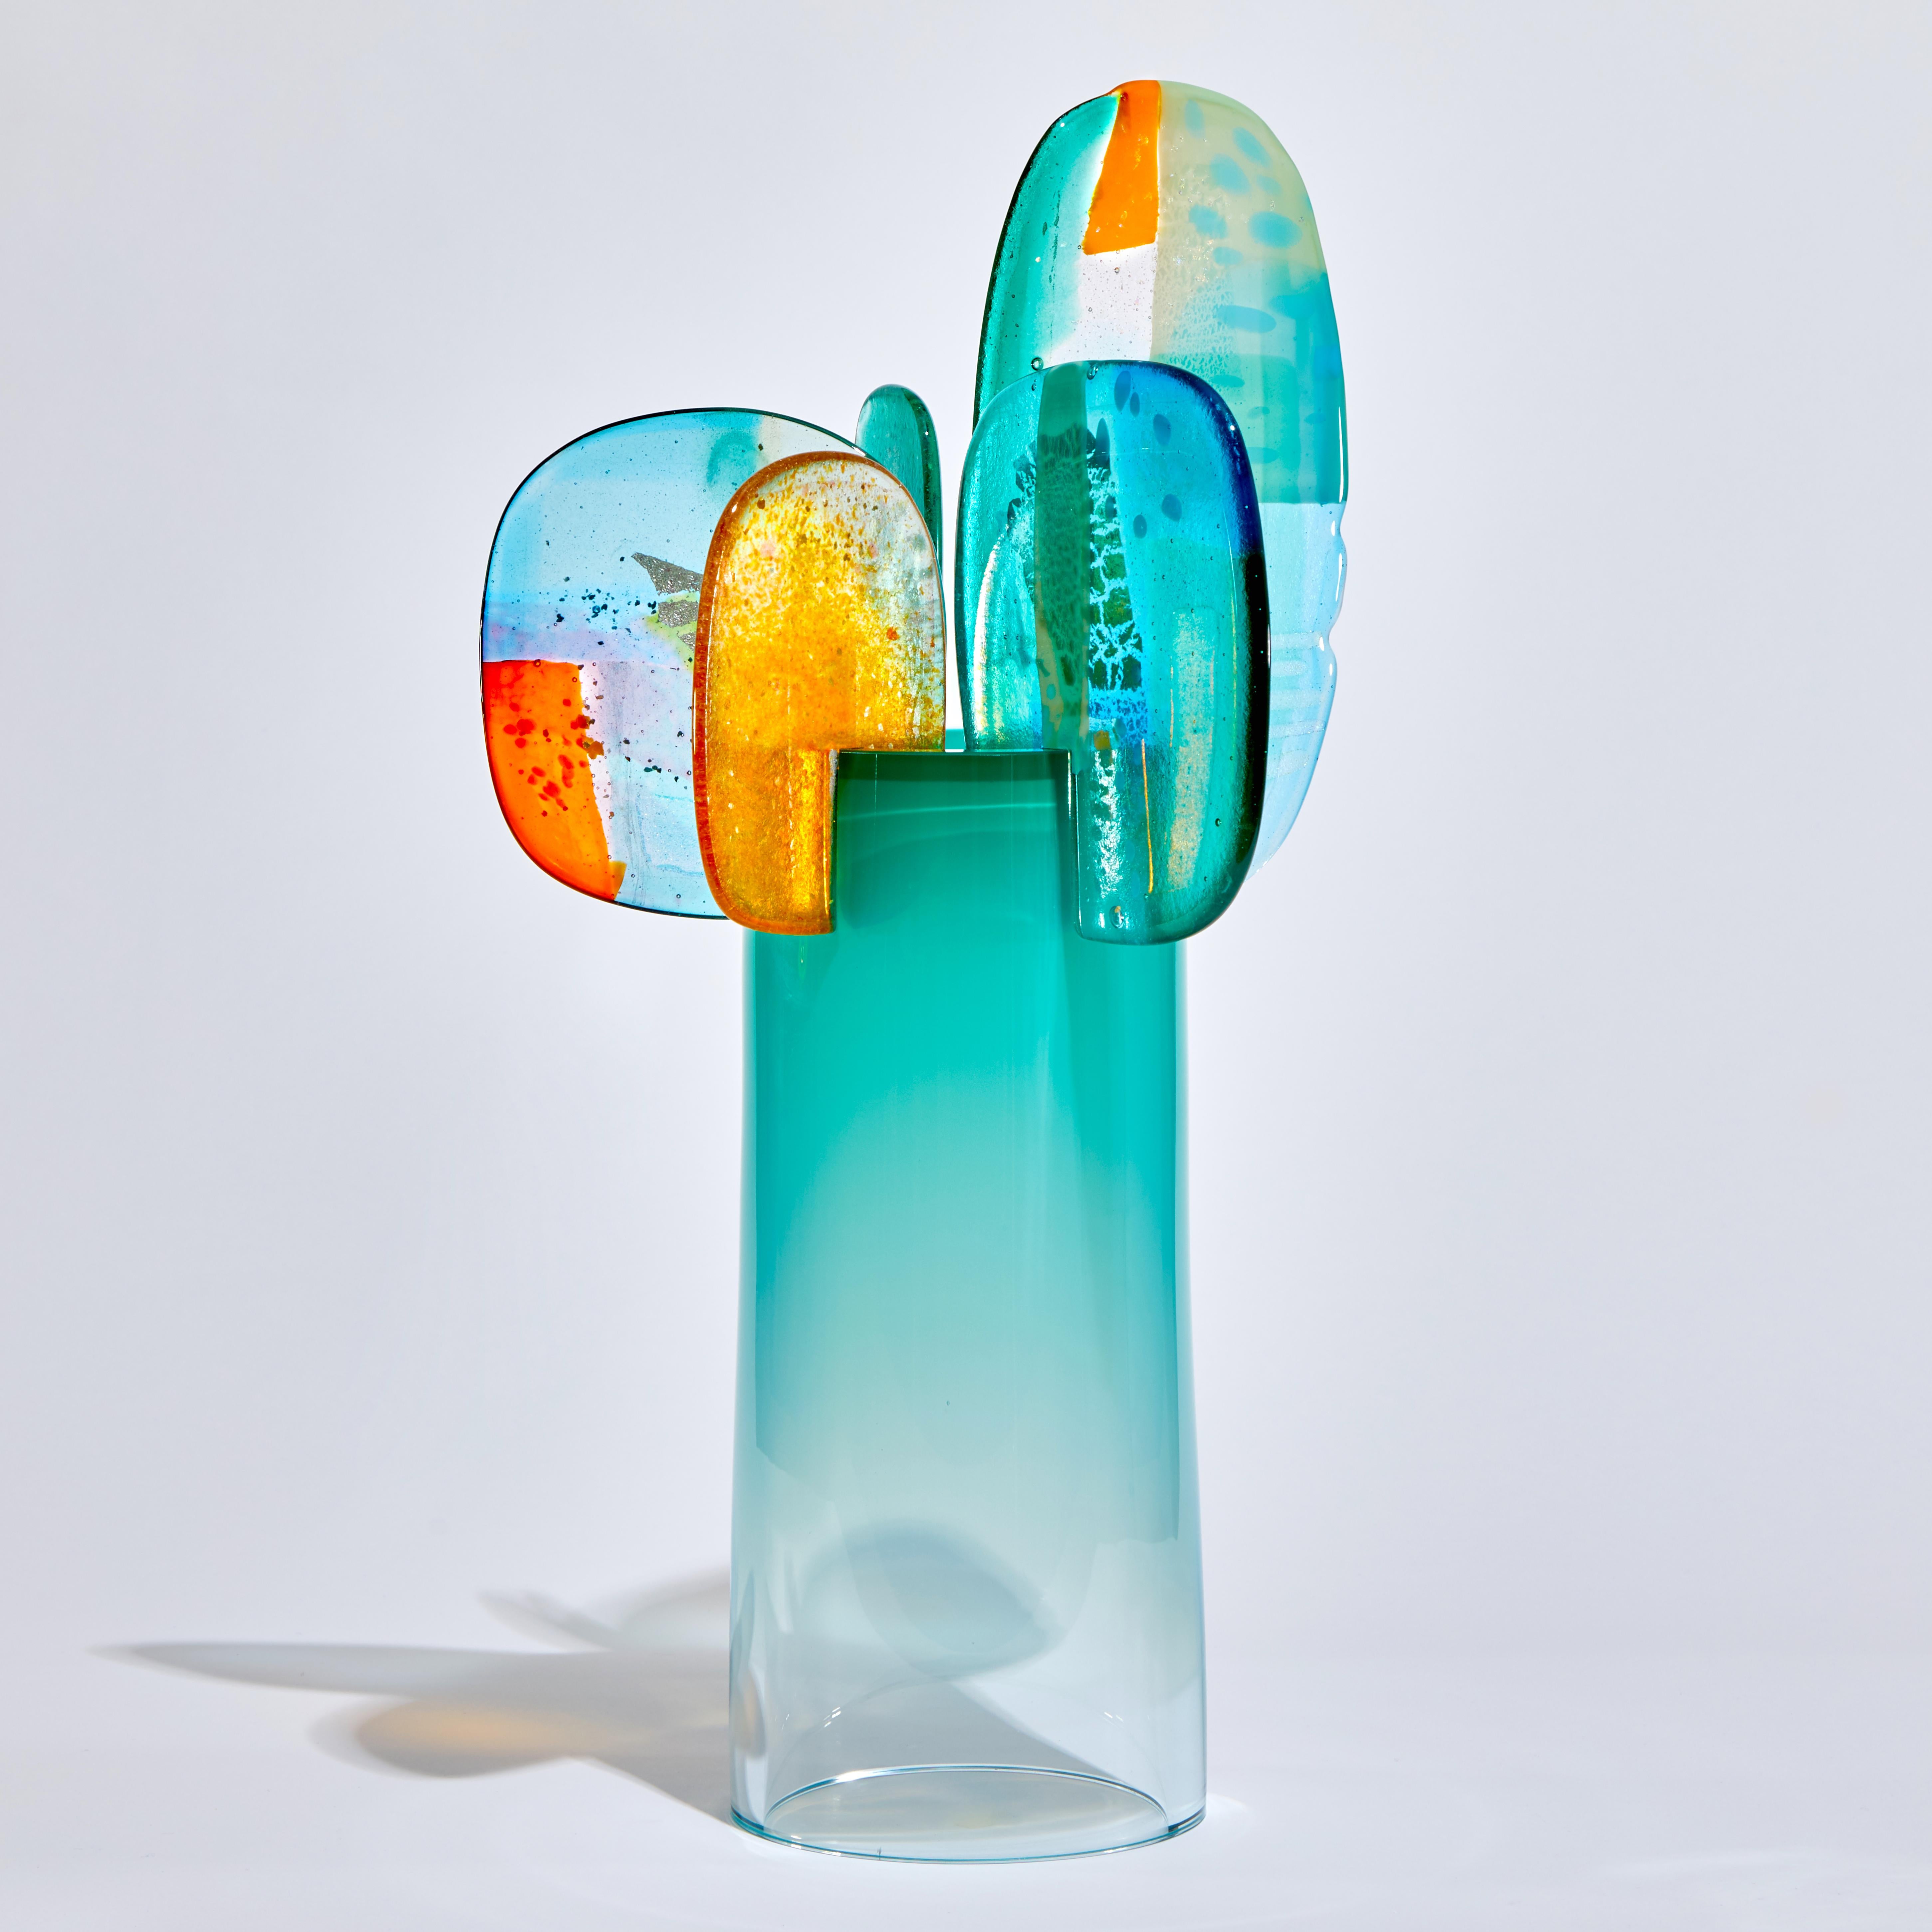 'Paradise 01 in Emerald' is a unique glass sculpture created using hybrid hand-made glass techniques by the British artist Amy Cushing. Combining mouth blown glass with kiln formed glass, each piece within the collection displays a multiple of